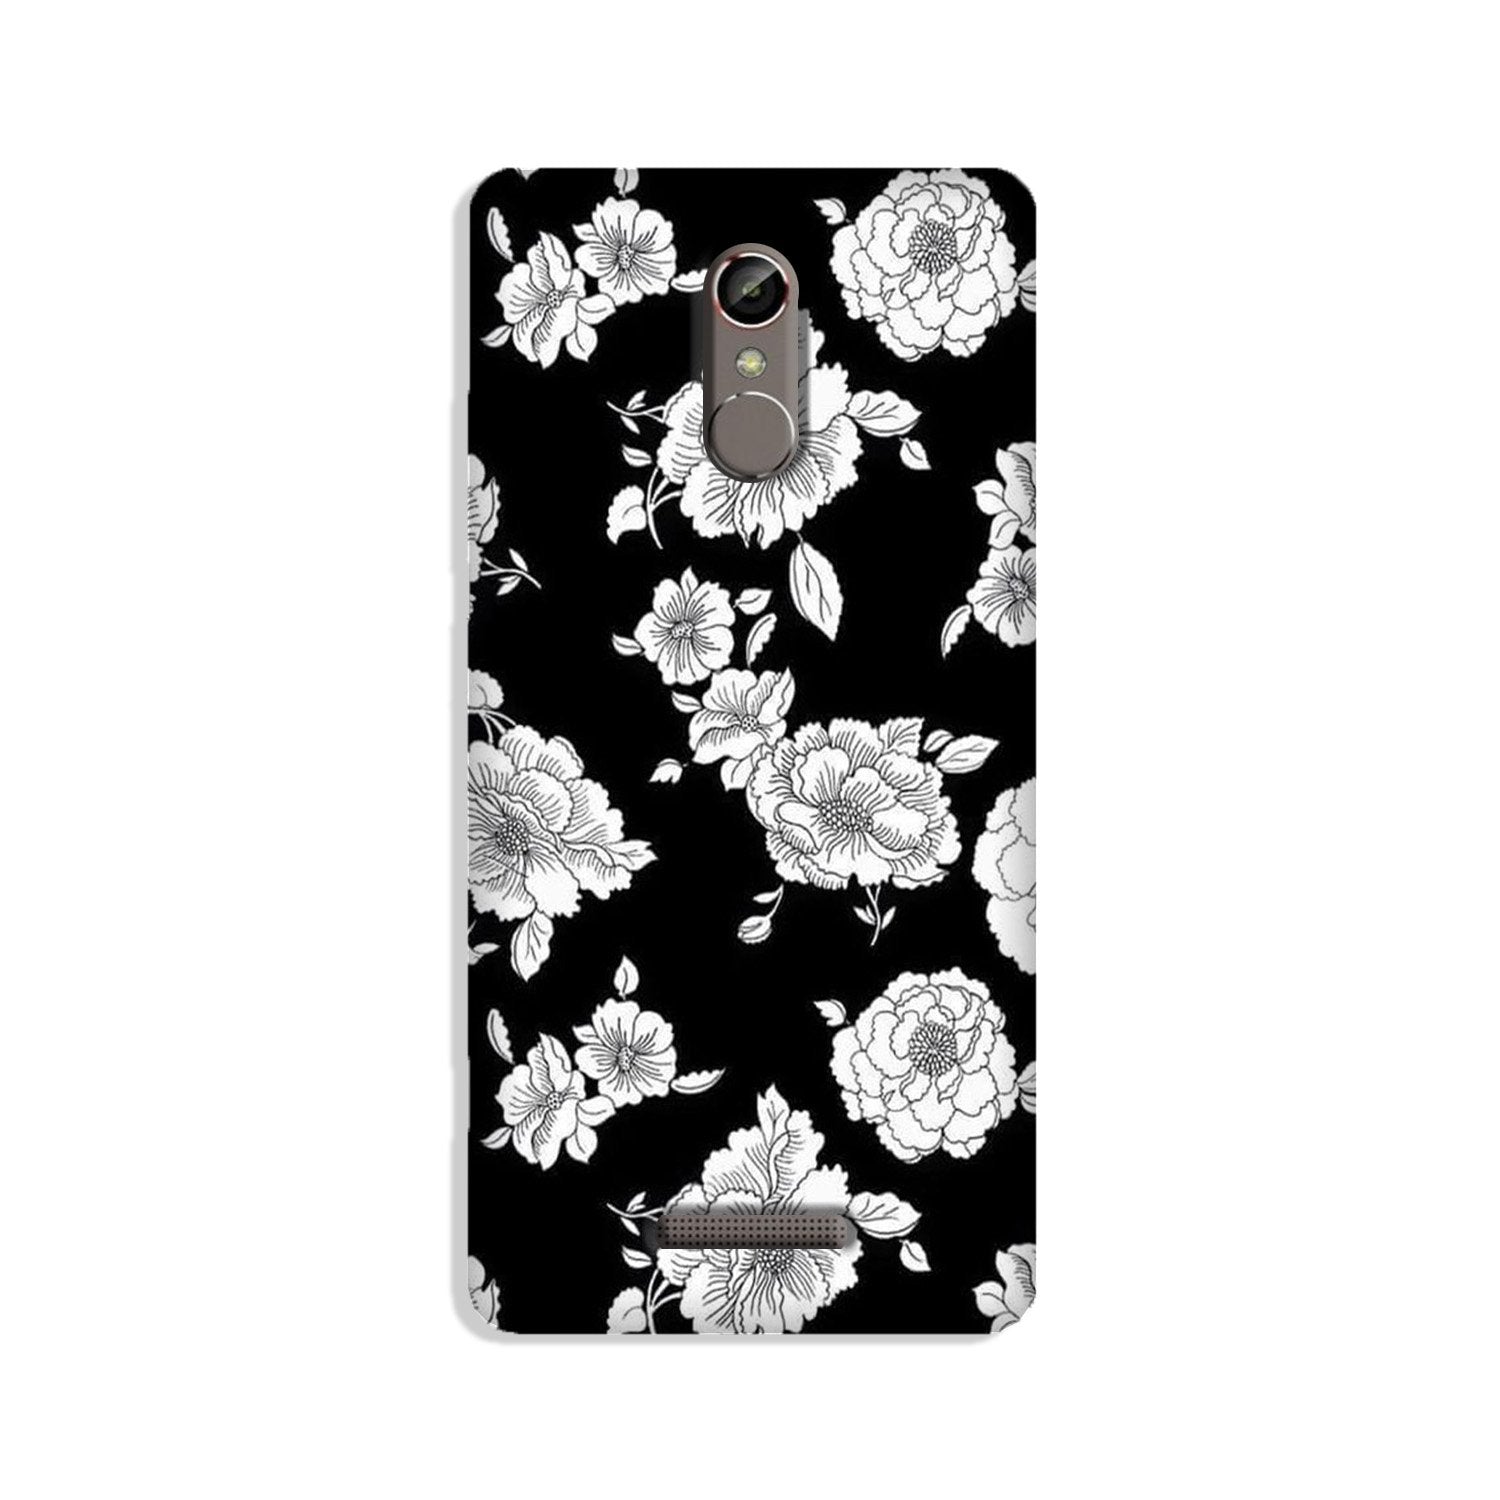 White flowers Black Background Case for Redmi Note 3